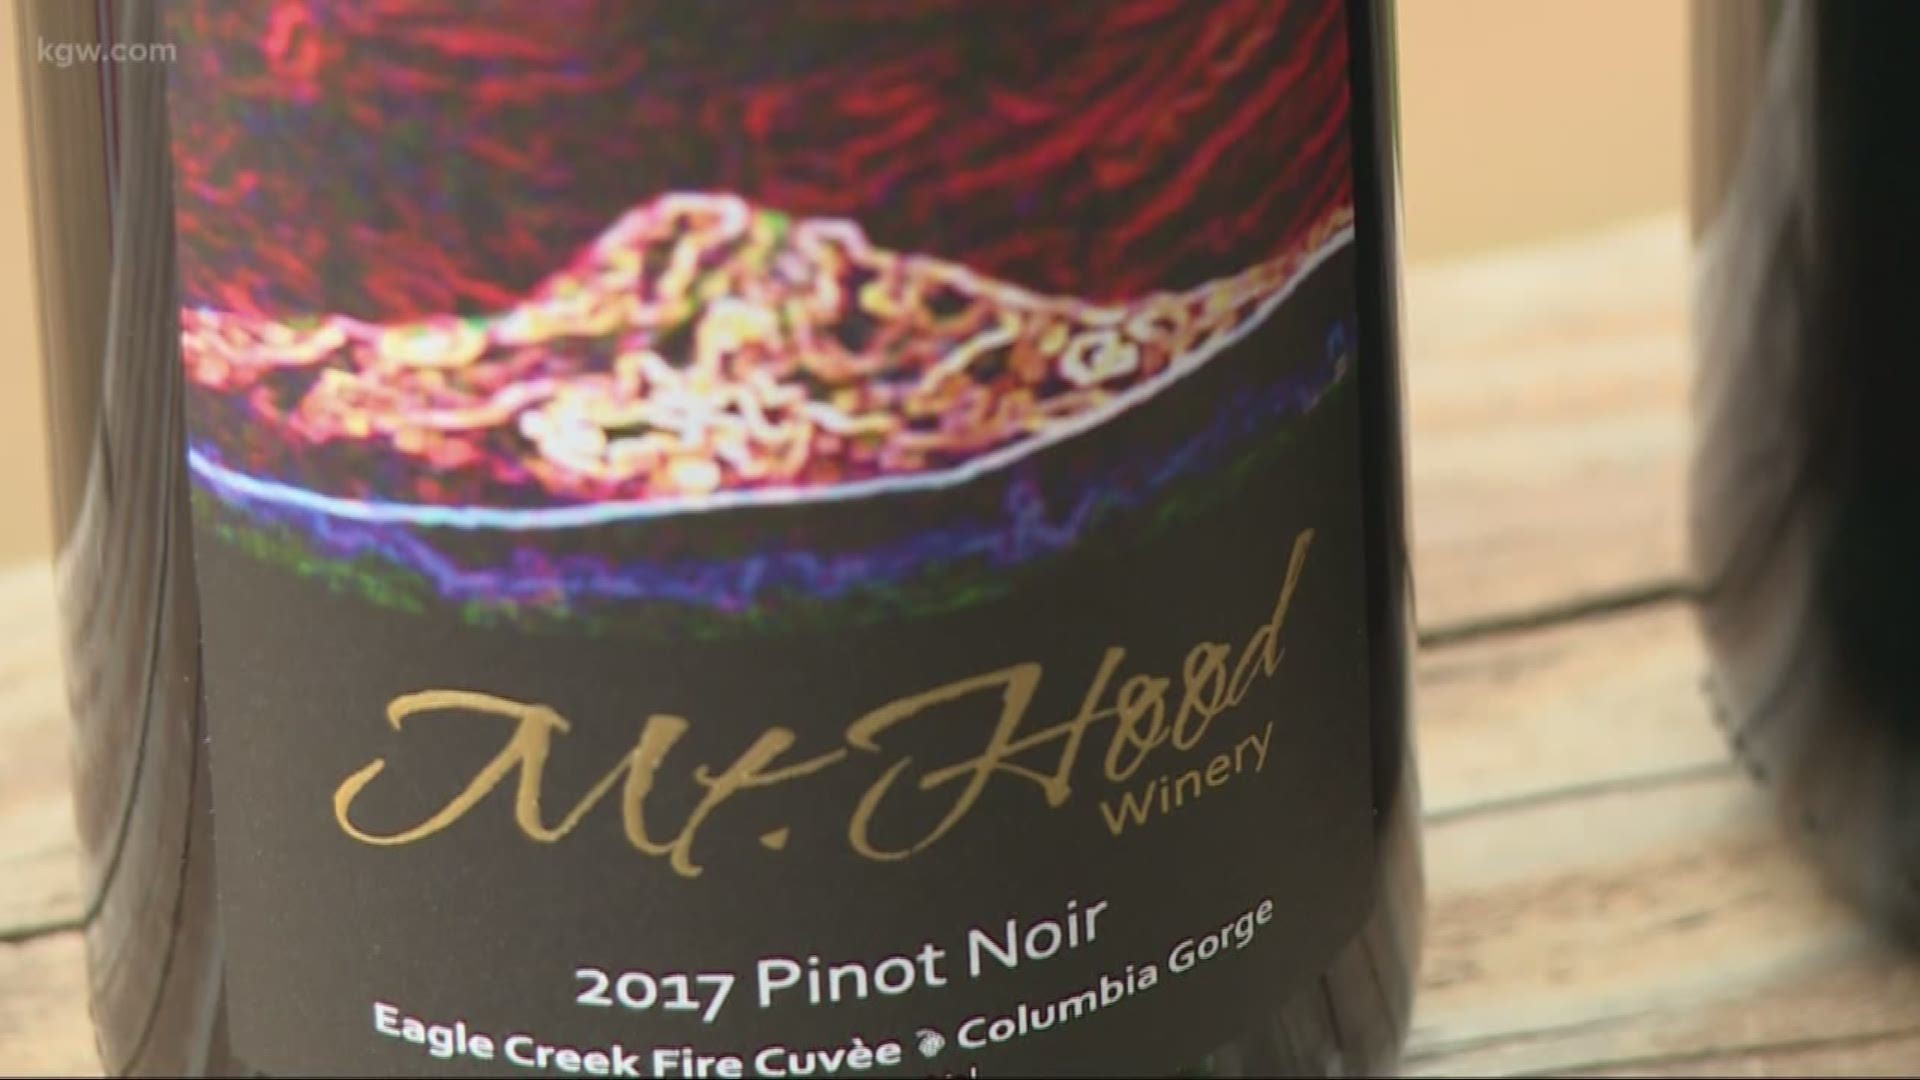 Wine made from grapes harvested after the Eagle Creek Fire is set to be released.